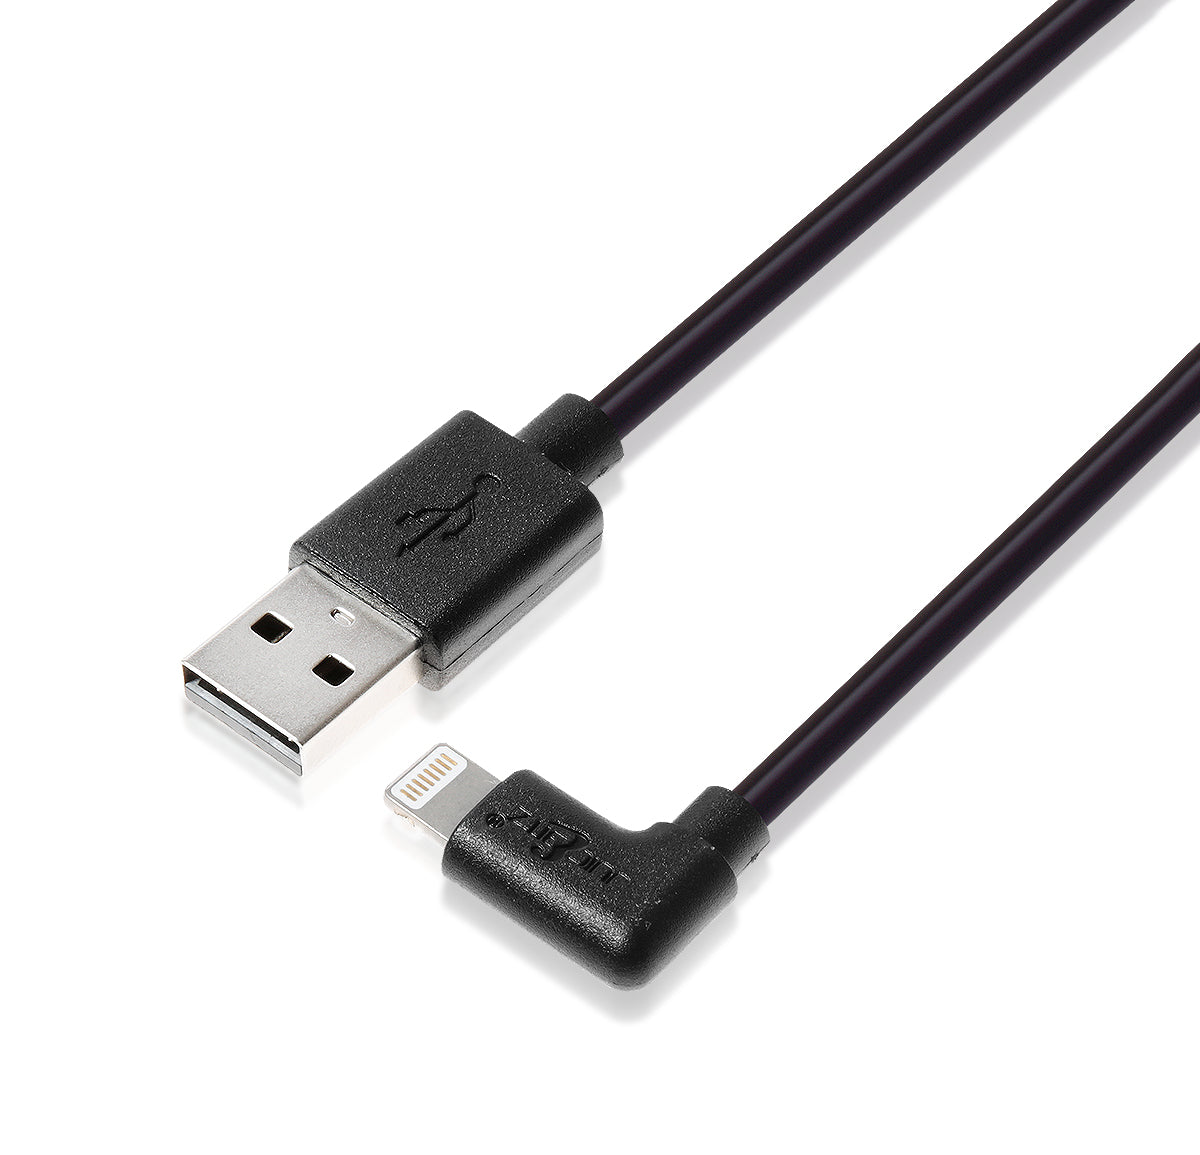 Heavy Duty Angled USB Charger Cable Data Sync Lead for iPhone, iPad, iPod - Black